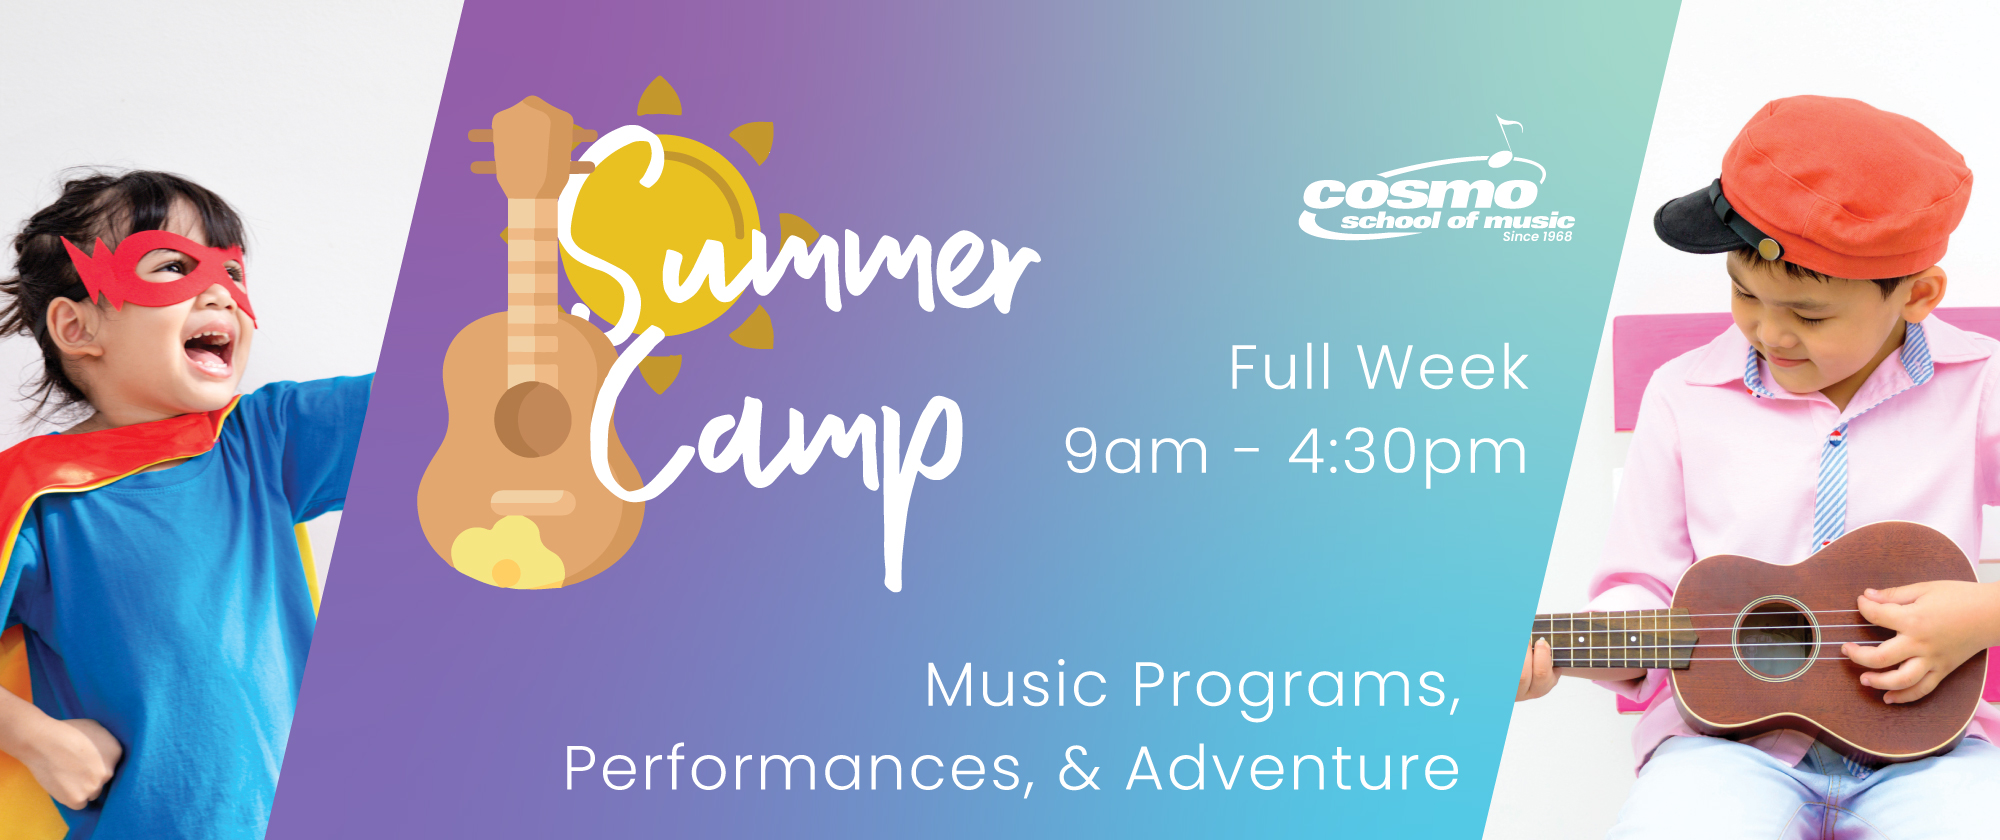 Cosmo Music Summer Camps - Cosmo School of Music